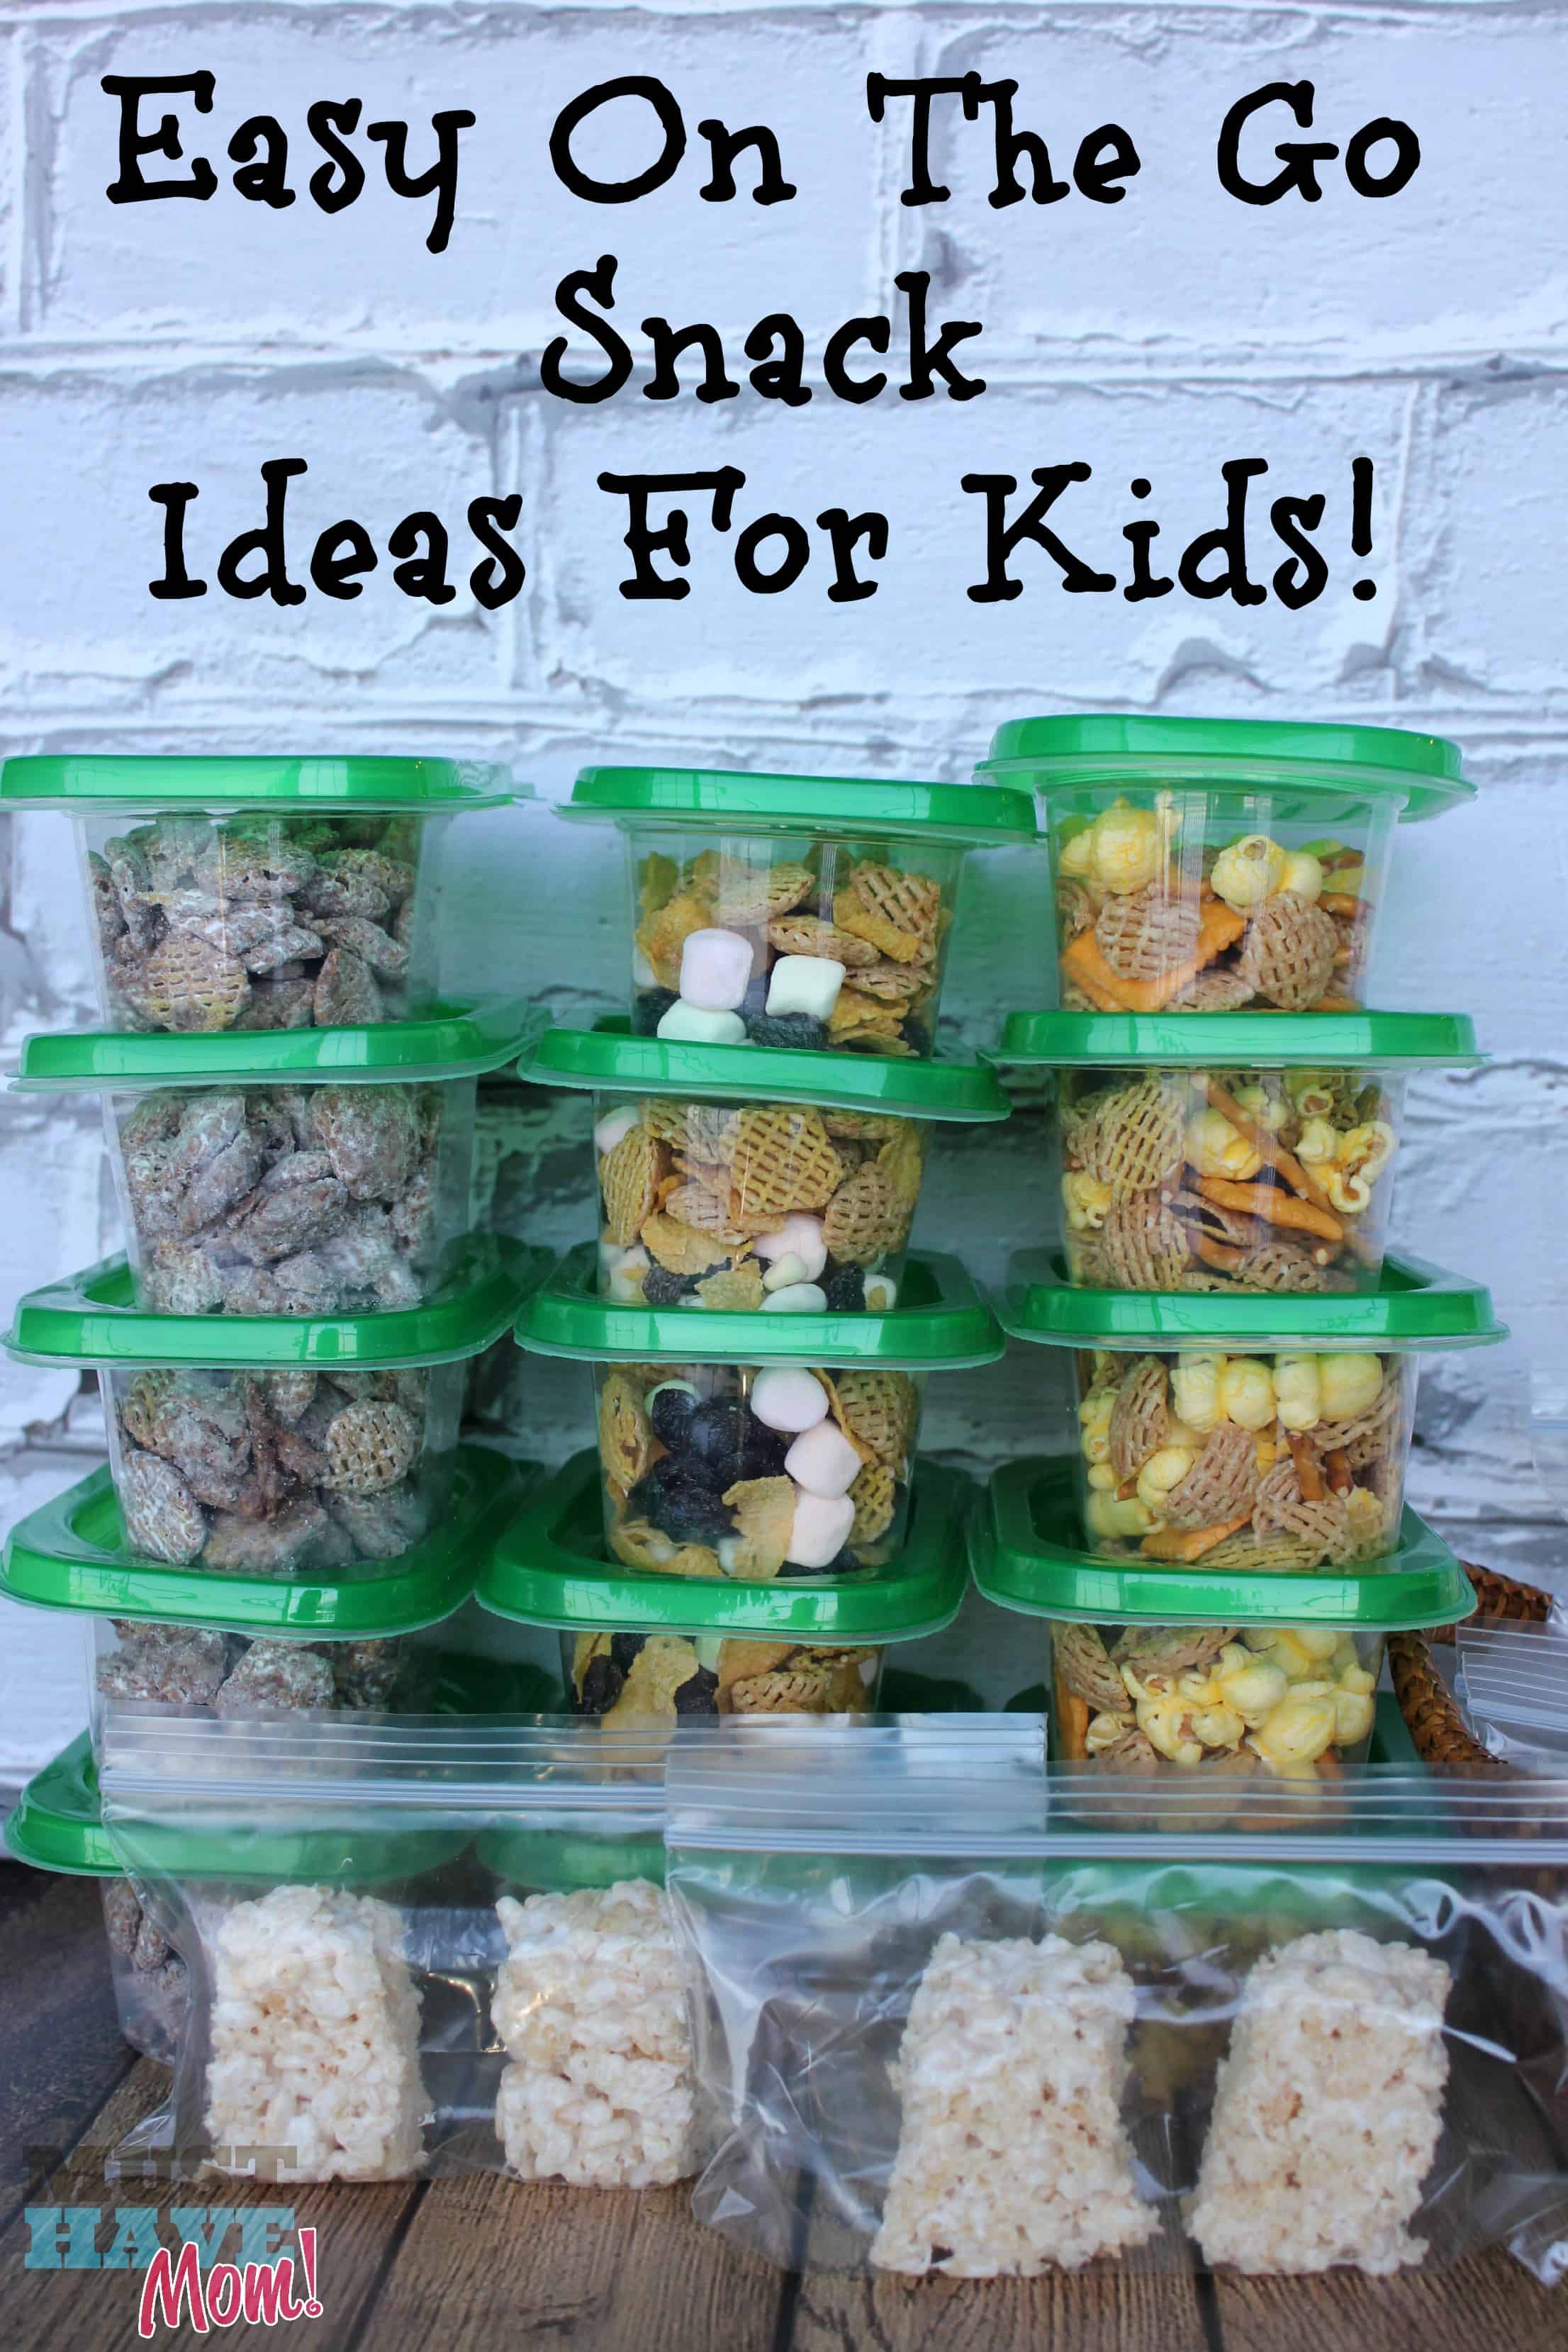 Easy On The Go Snack Ideas For Kids! Stock Your Pantry With Grab and Go Snack Packs